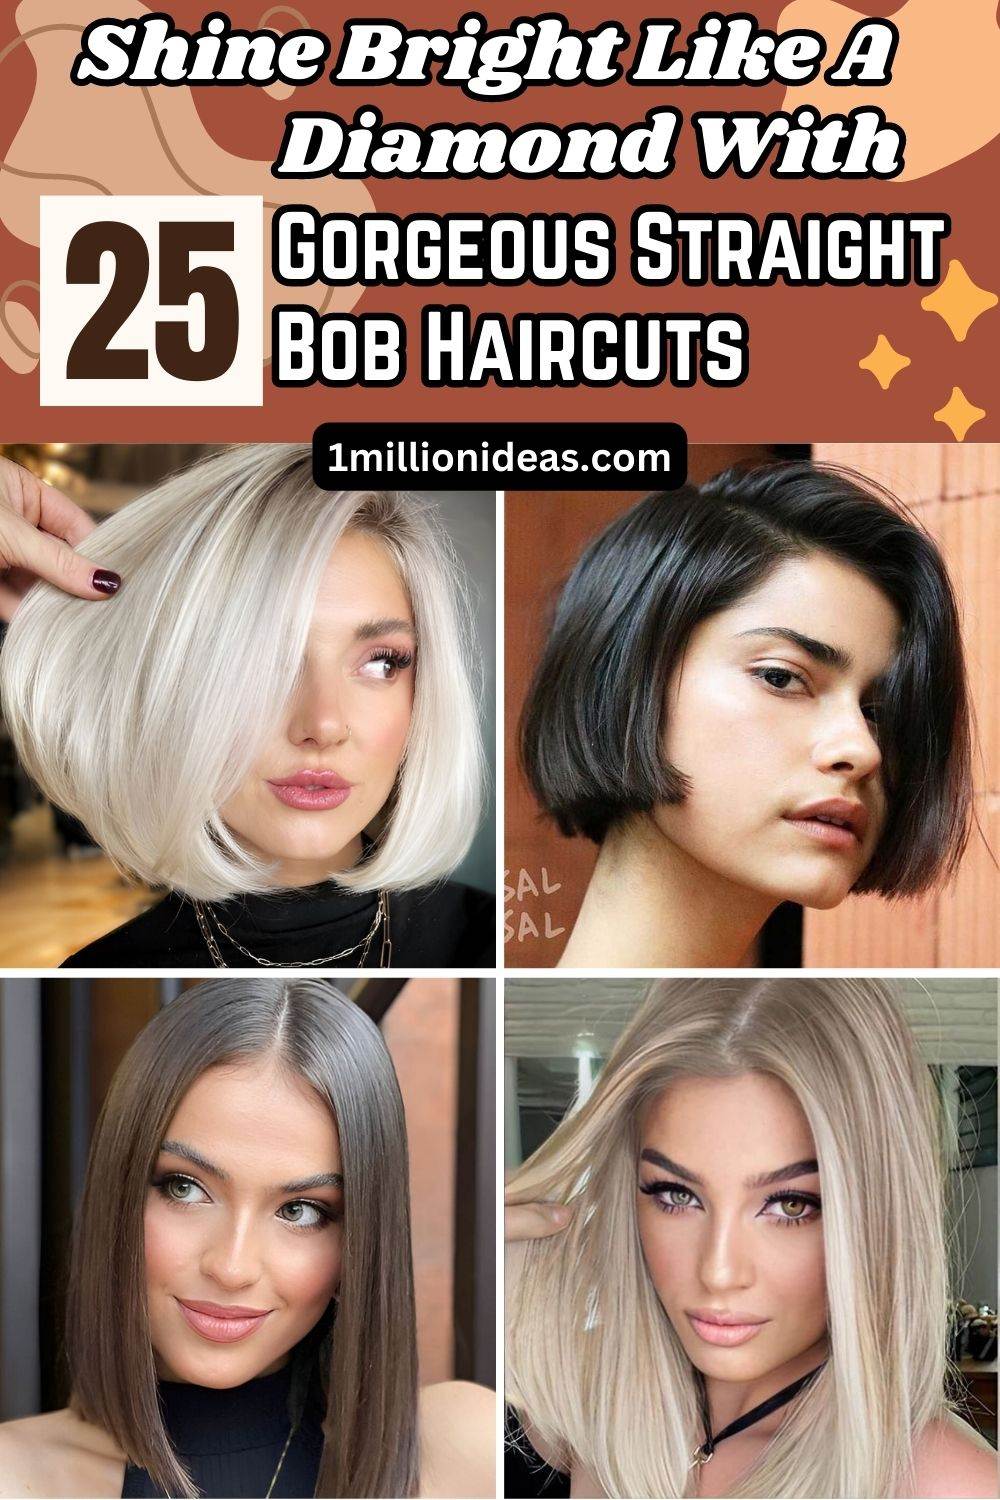 Shine Bright Like A Diamond With These 25 Gorgeous Straight Bob Haircuts - 161